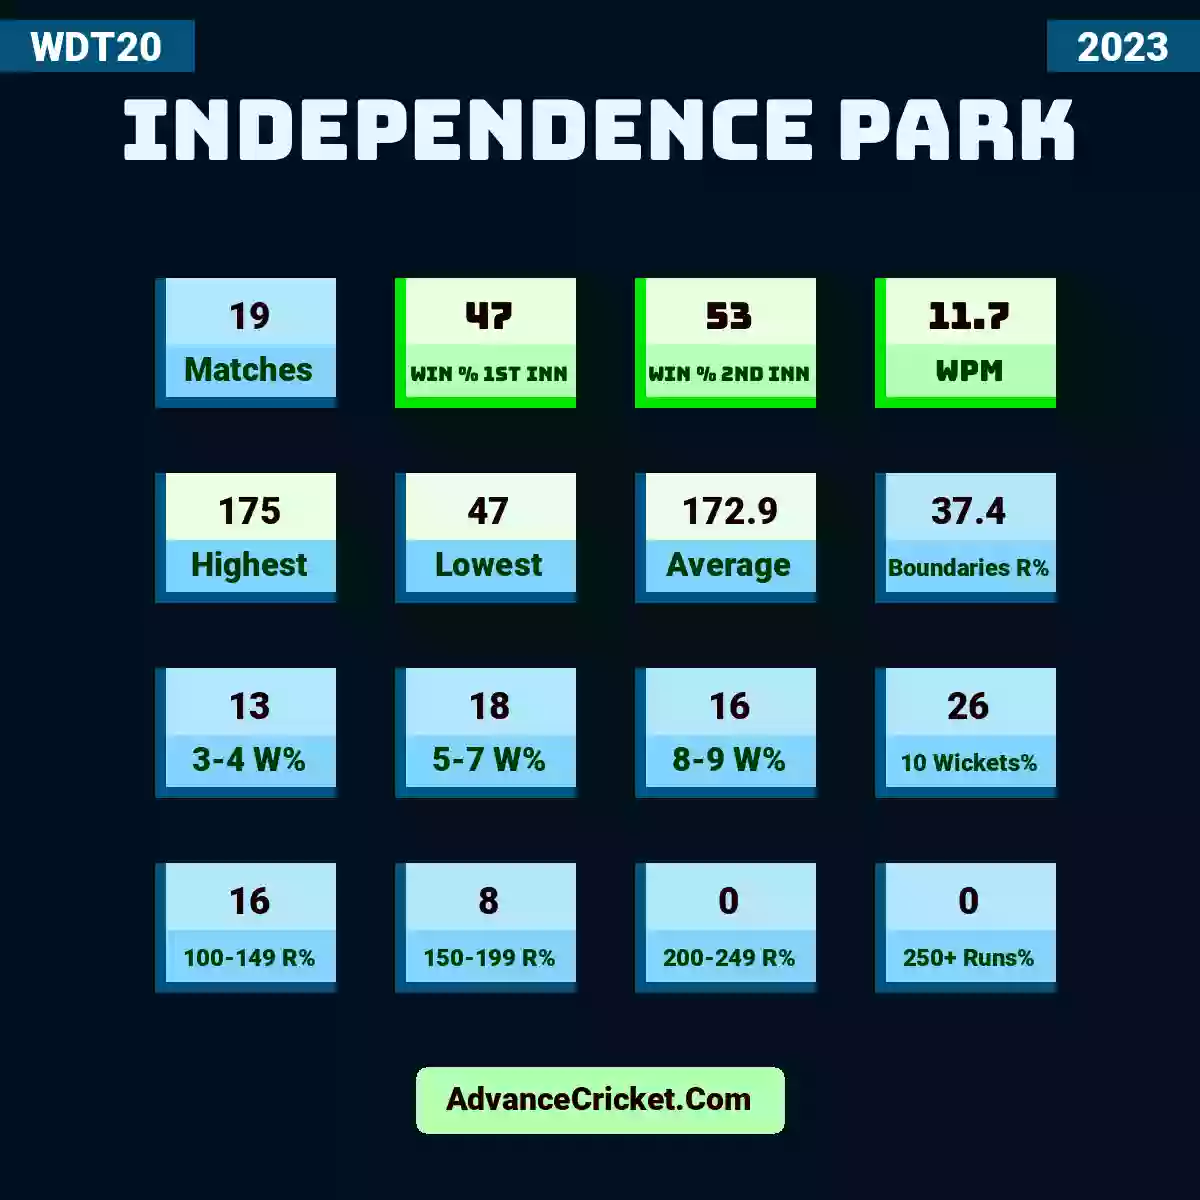 Image showing Independence Park with Matches: 19, Win % 1st Inn: 47, Win % 2nd Inn: 53, WPM: 11.7, Highest: 175, Lowest: 47, Average: 172.9, Boundaries R%: 37.4, 3-4 W%: 13, 5-7 W%: 18, 8-9 W%: 16, 10 Wickets%: 26, 100-149 R%: 16, 150-199 R%: 8, 200-249 R%: 0, 250+ Runs%: 0.